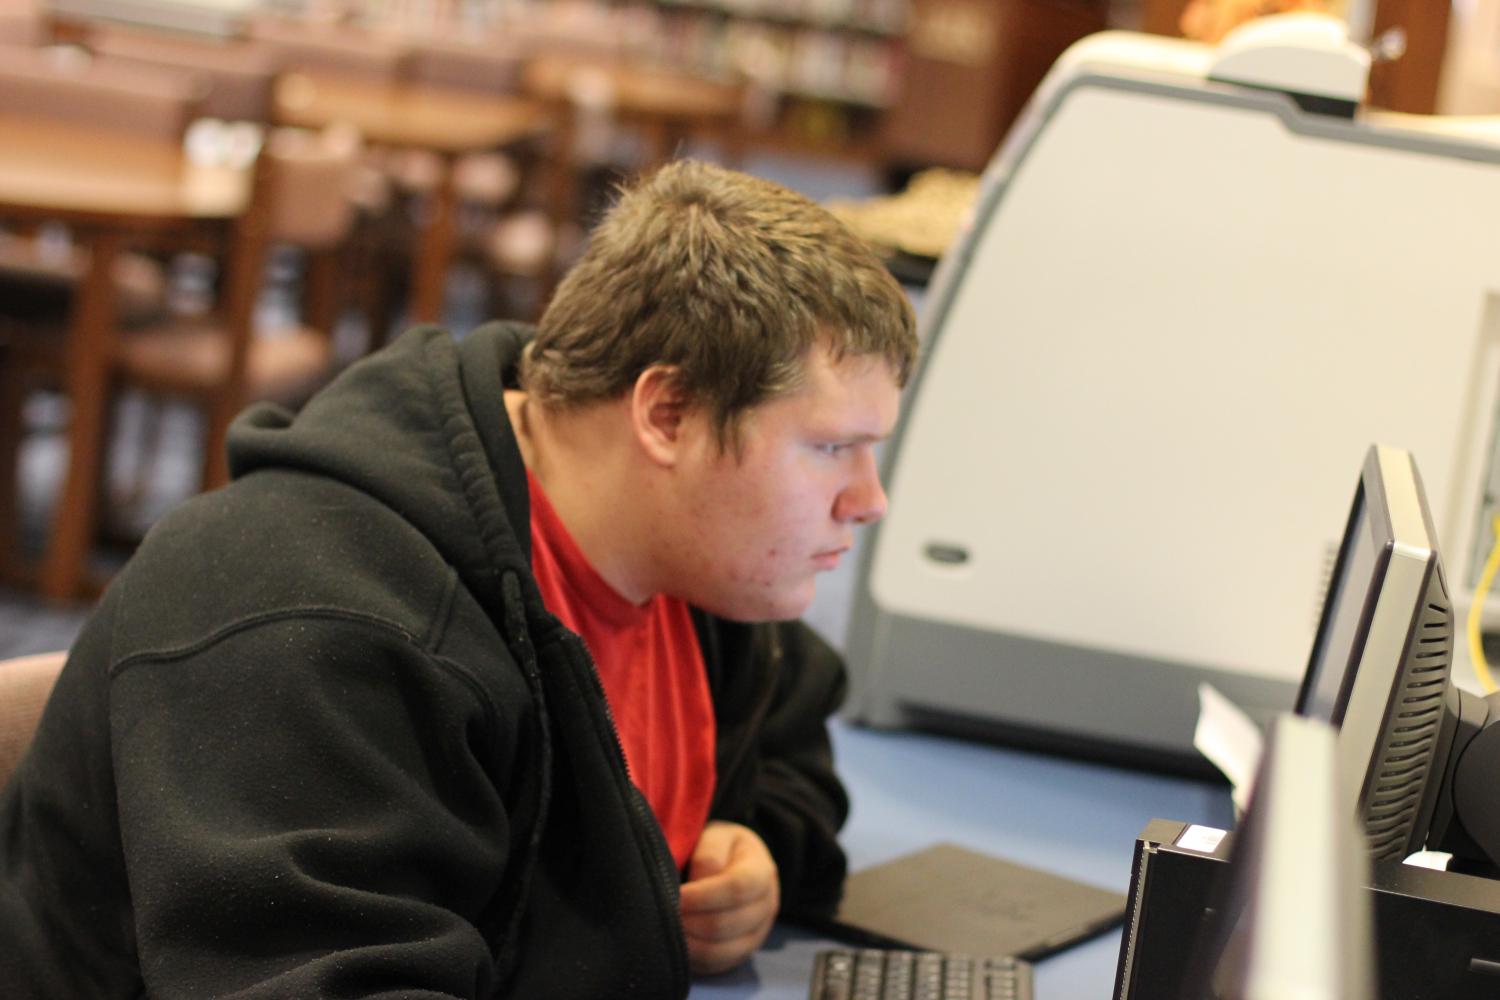 Student Technician James Appl works on a computer in the library. Appl is currently the only student technician in the school.